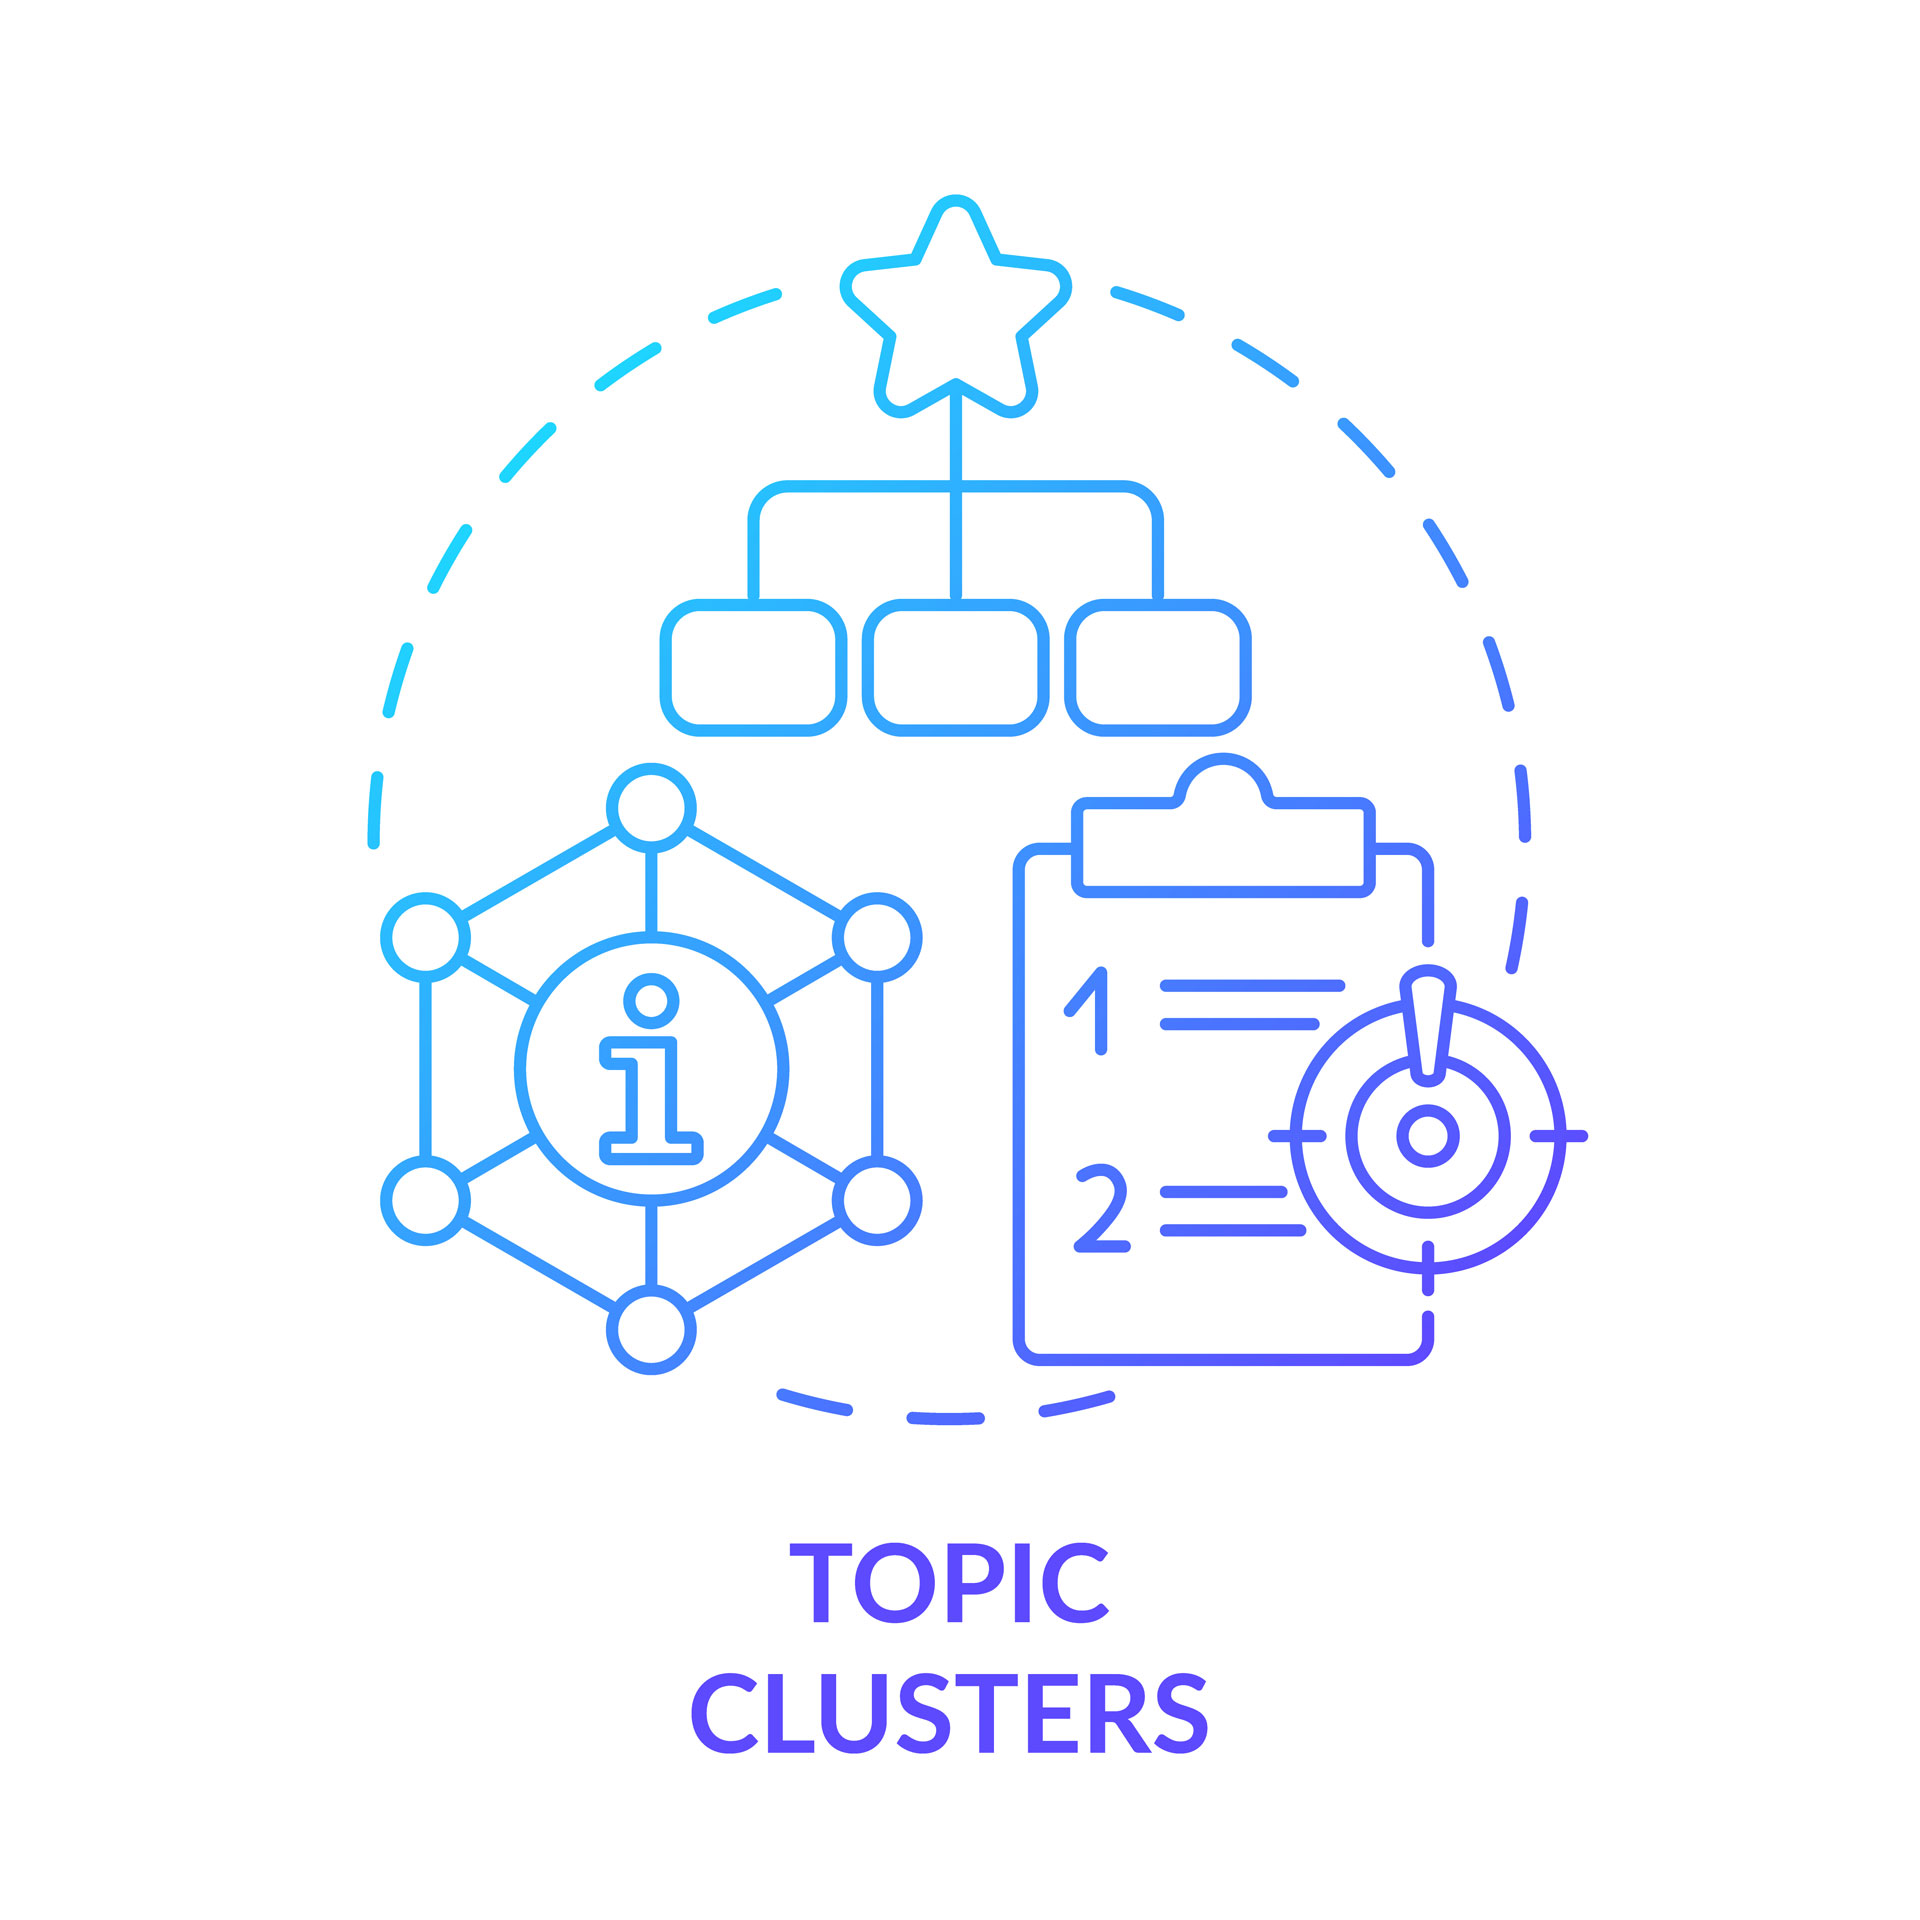 topic clusters text with blue gradient concept